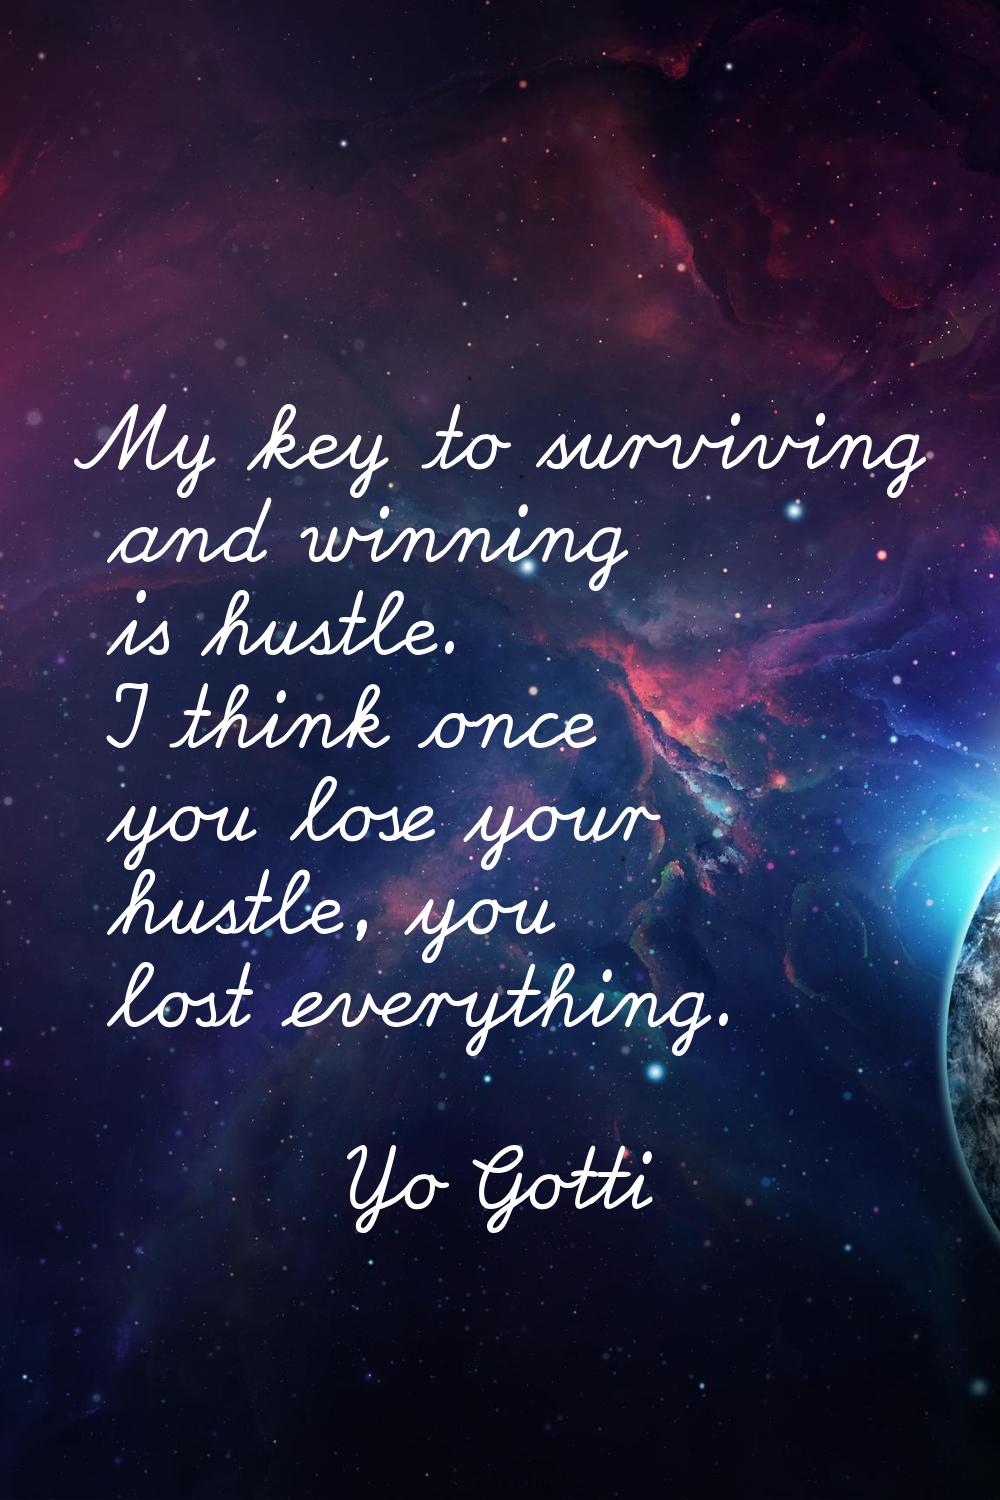 My key to surviving and winning is hustle. I think once you lose your hustle, you lost everything.